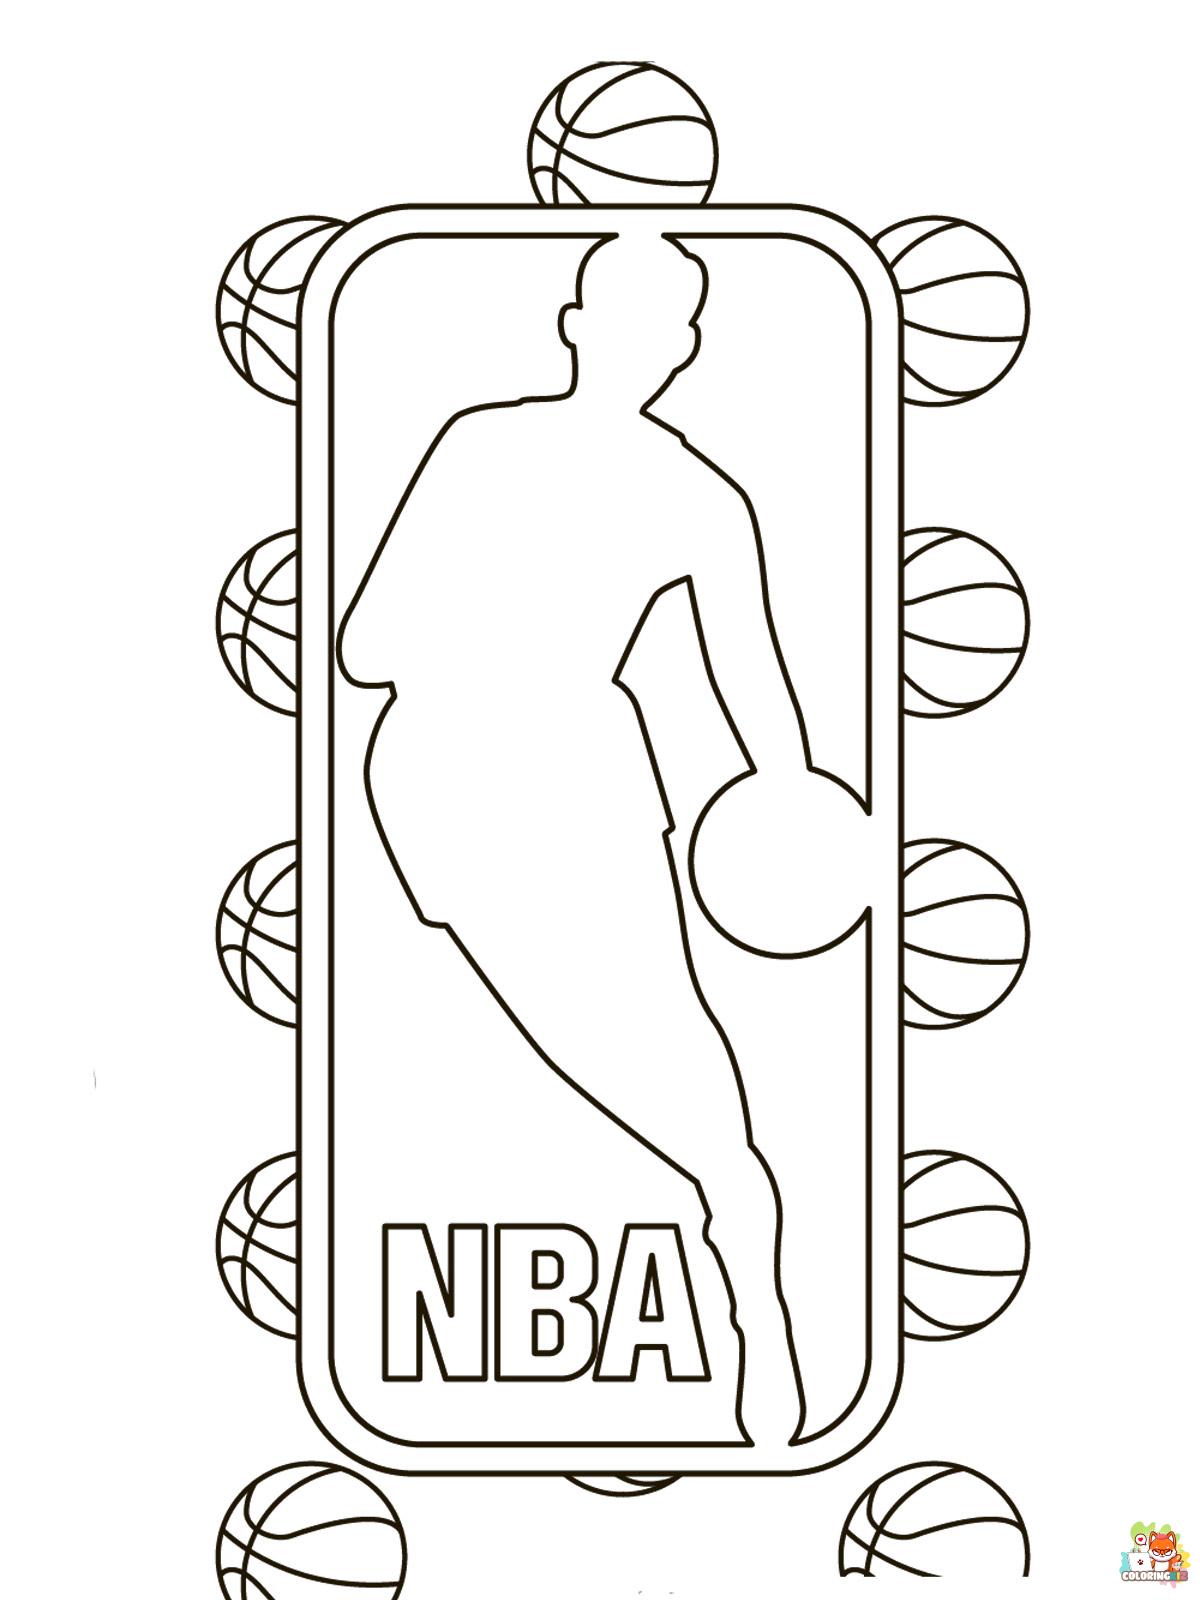 NBA Coloring Pages Printable and Free Coloring Fun for Kids